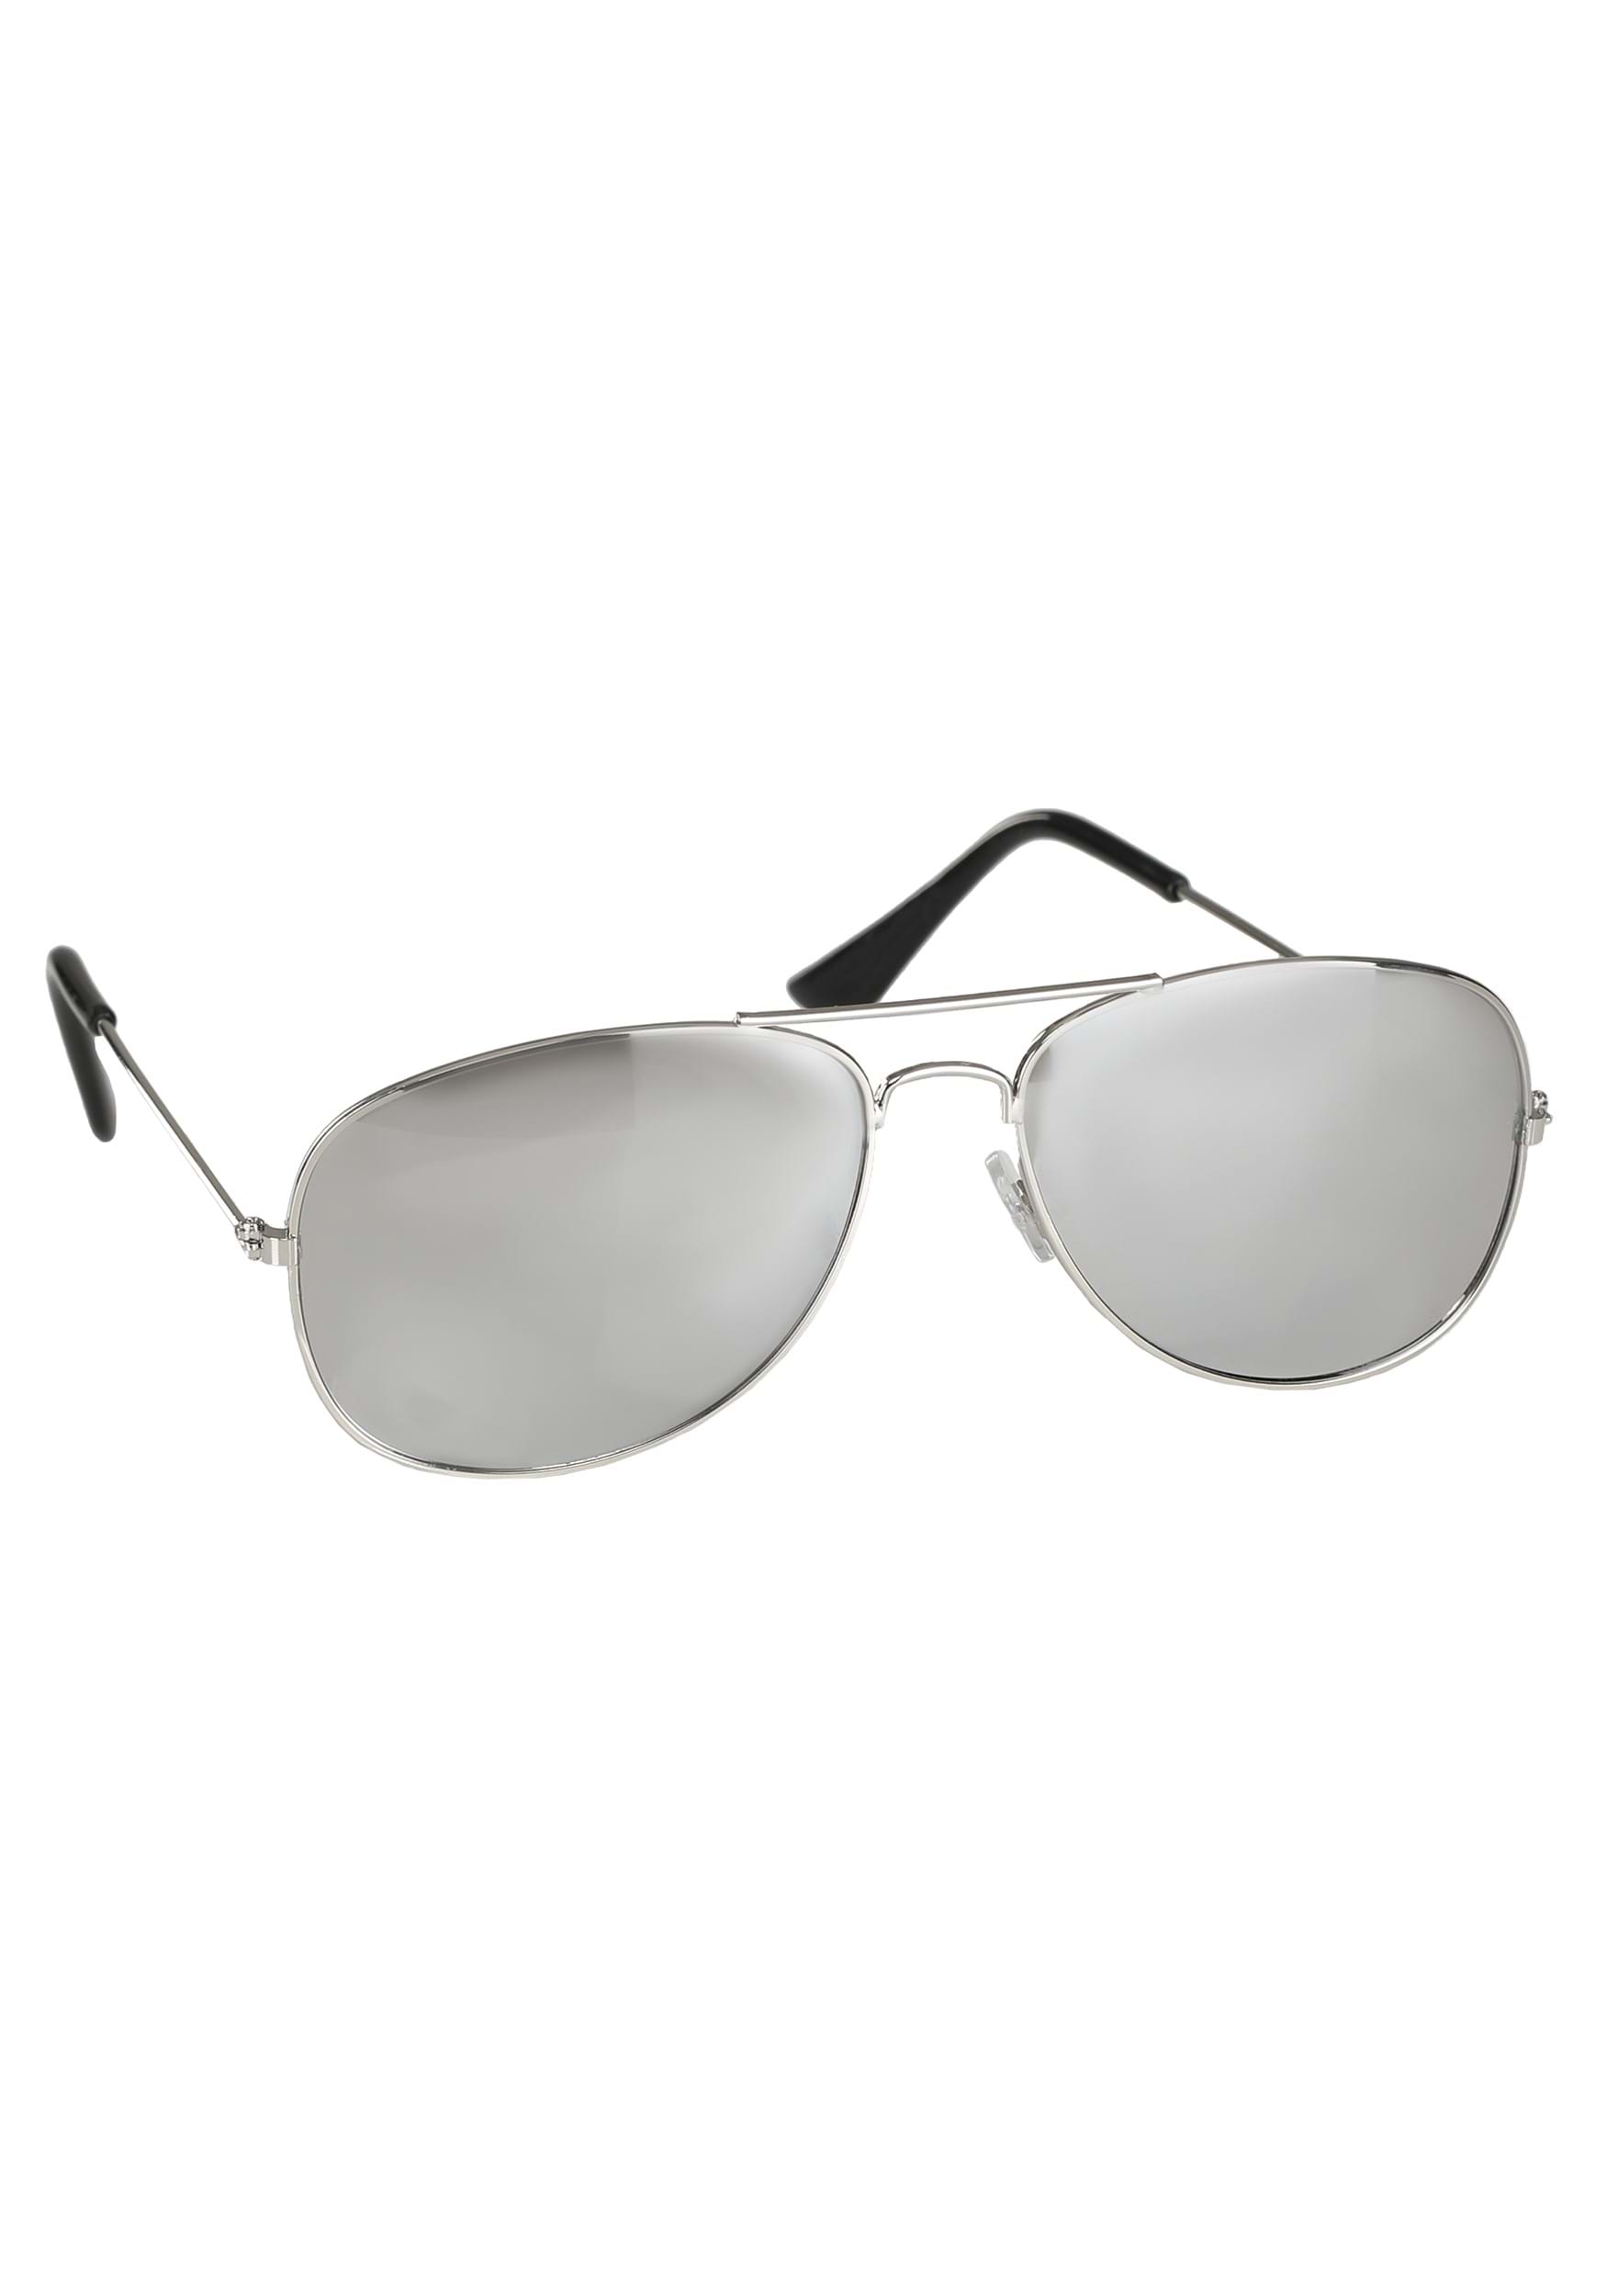 https://images.halloweencostumes.ca/products/81034/1-1/silver-mirror-police-sunglasses.jpg